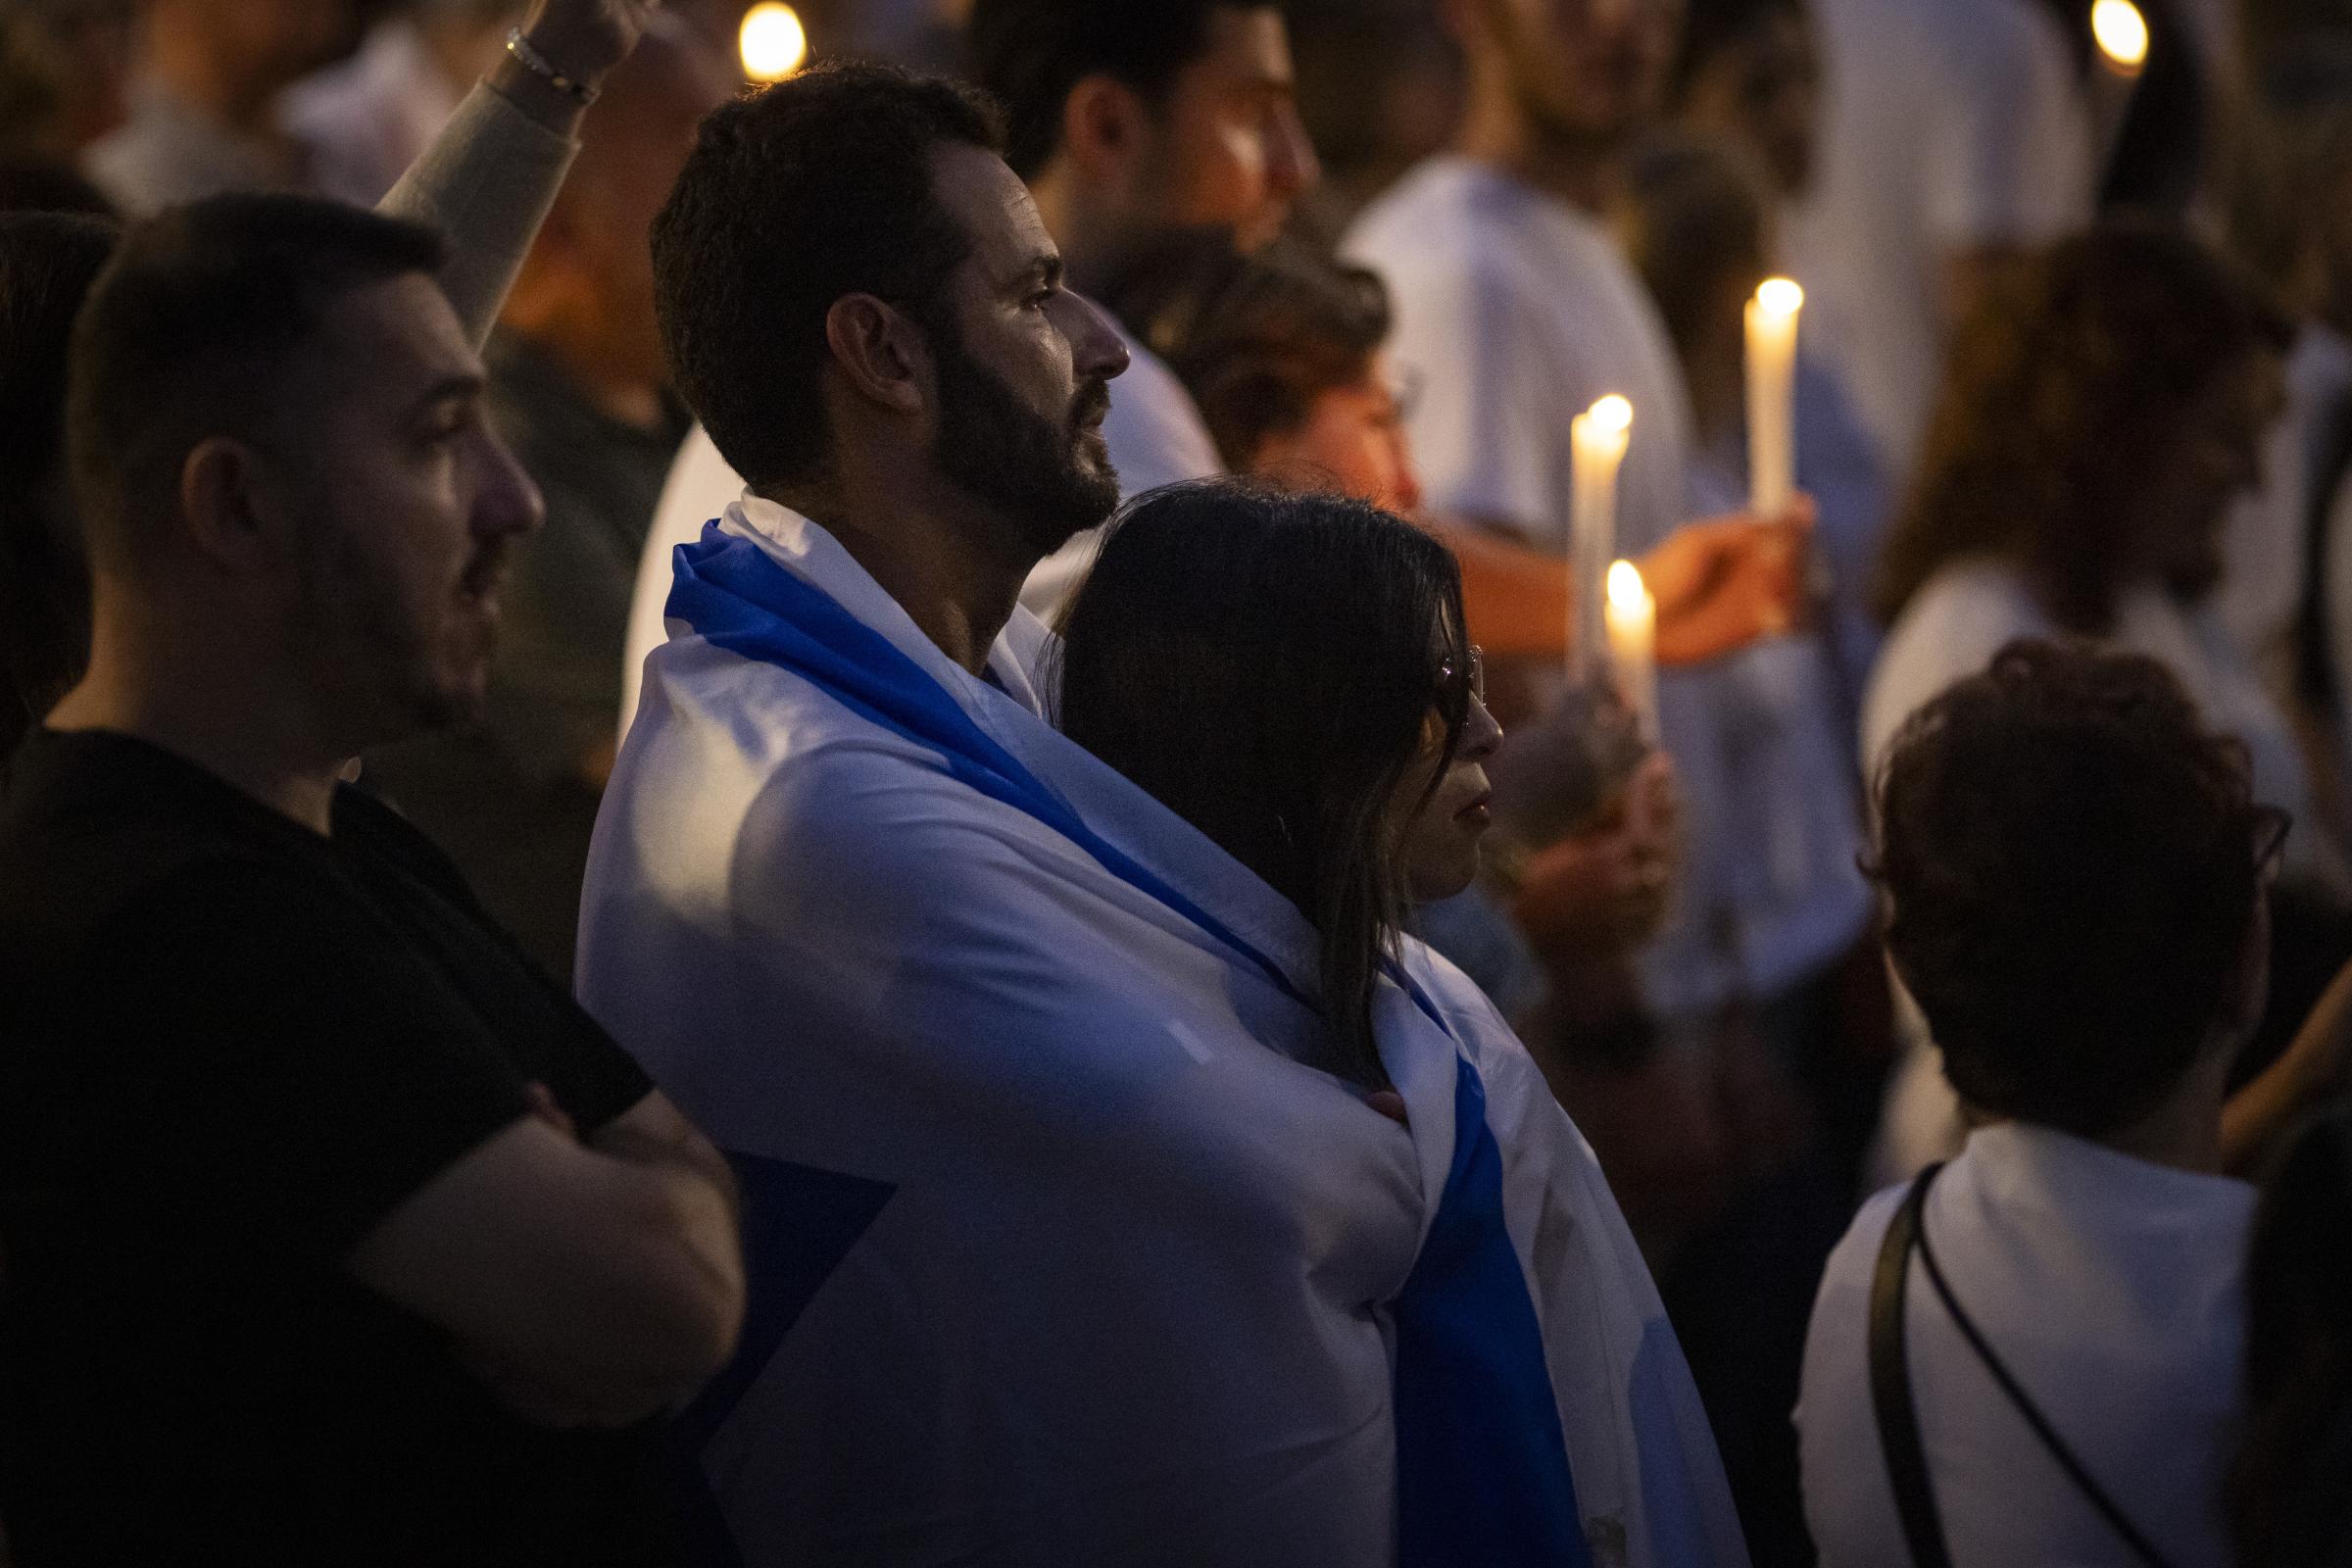 Pro-Israel demonstrations in South Florida - People attend a gathering in support of Israel in...